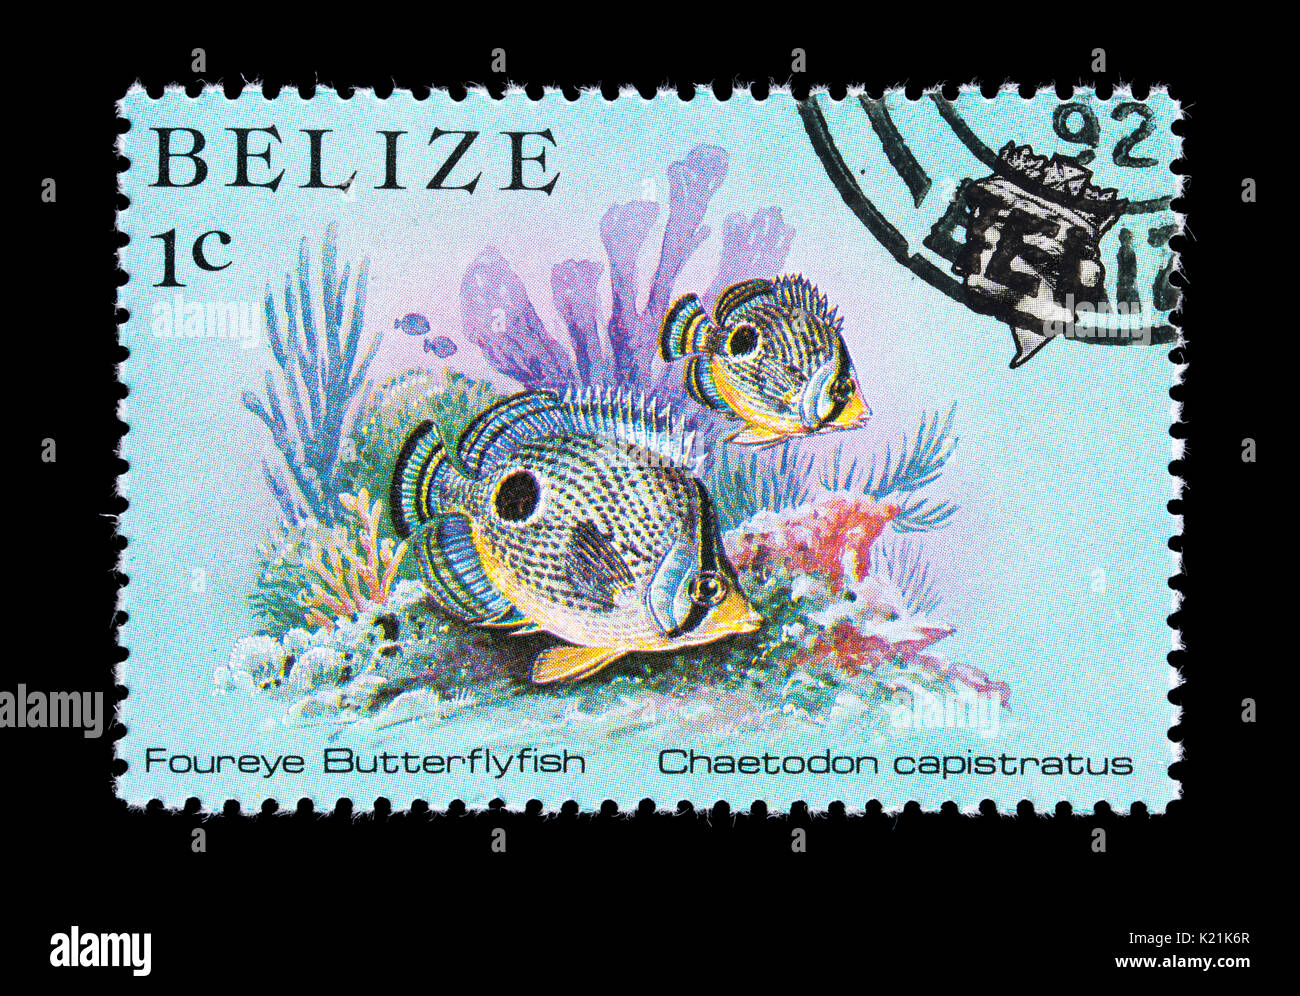 Postage stamp from Belize depicting a foureye butterflyfish (Chaetodon capistratus) Stock Photo